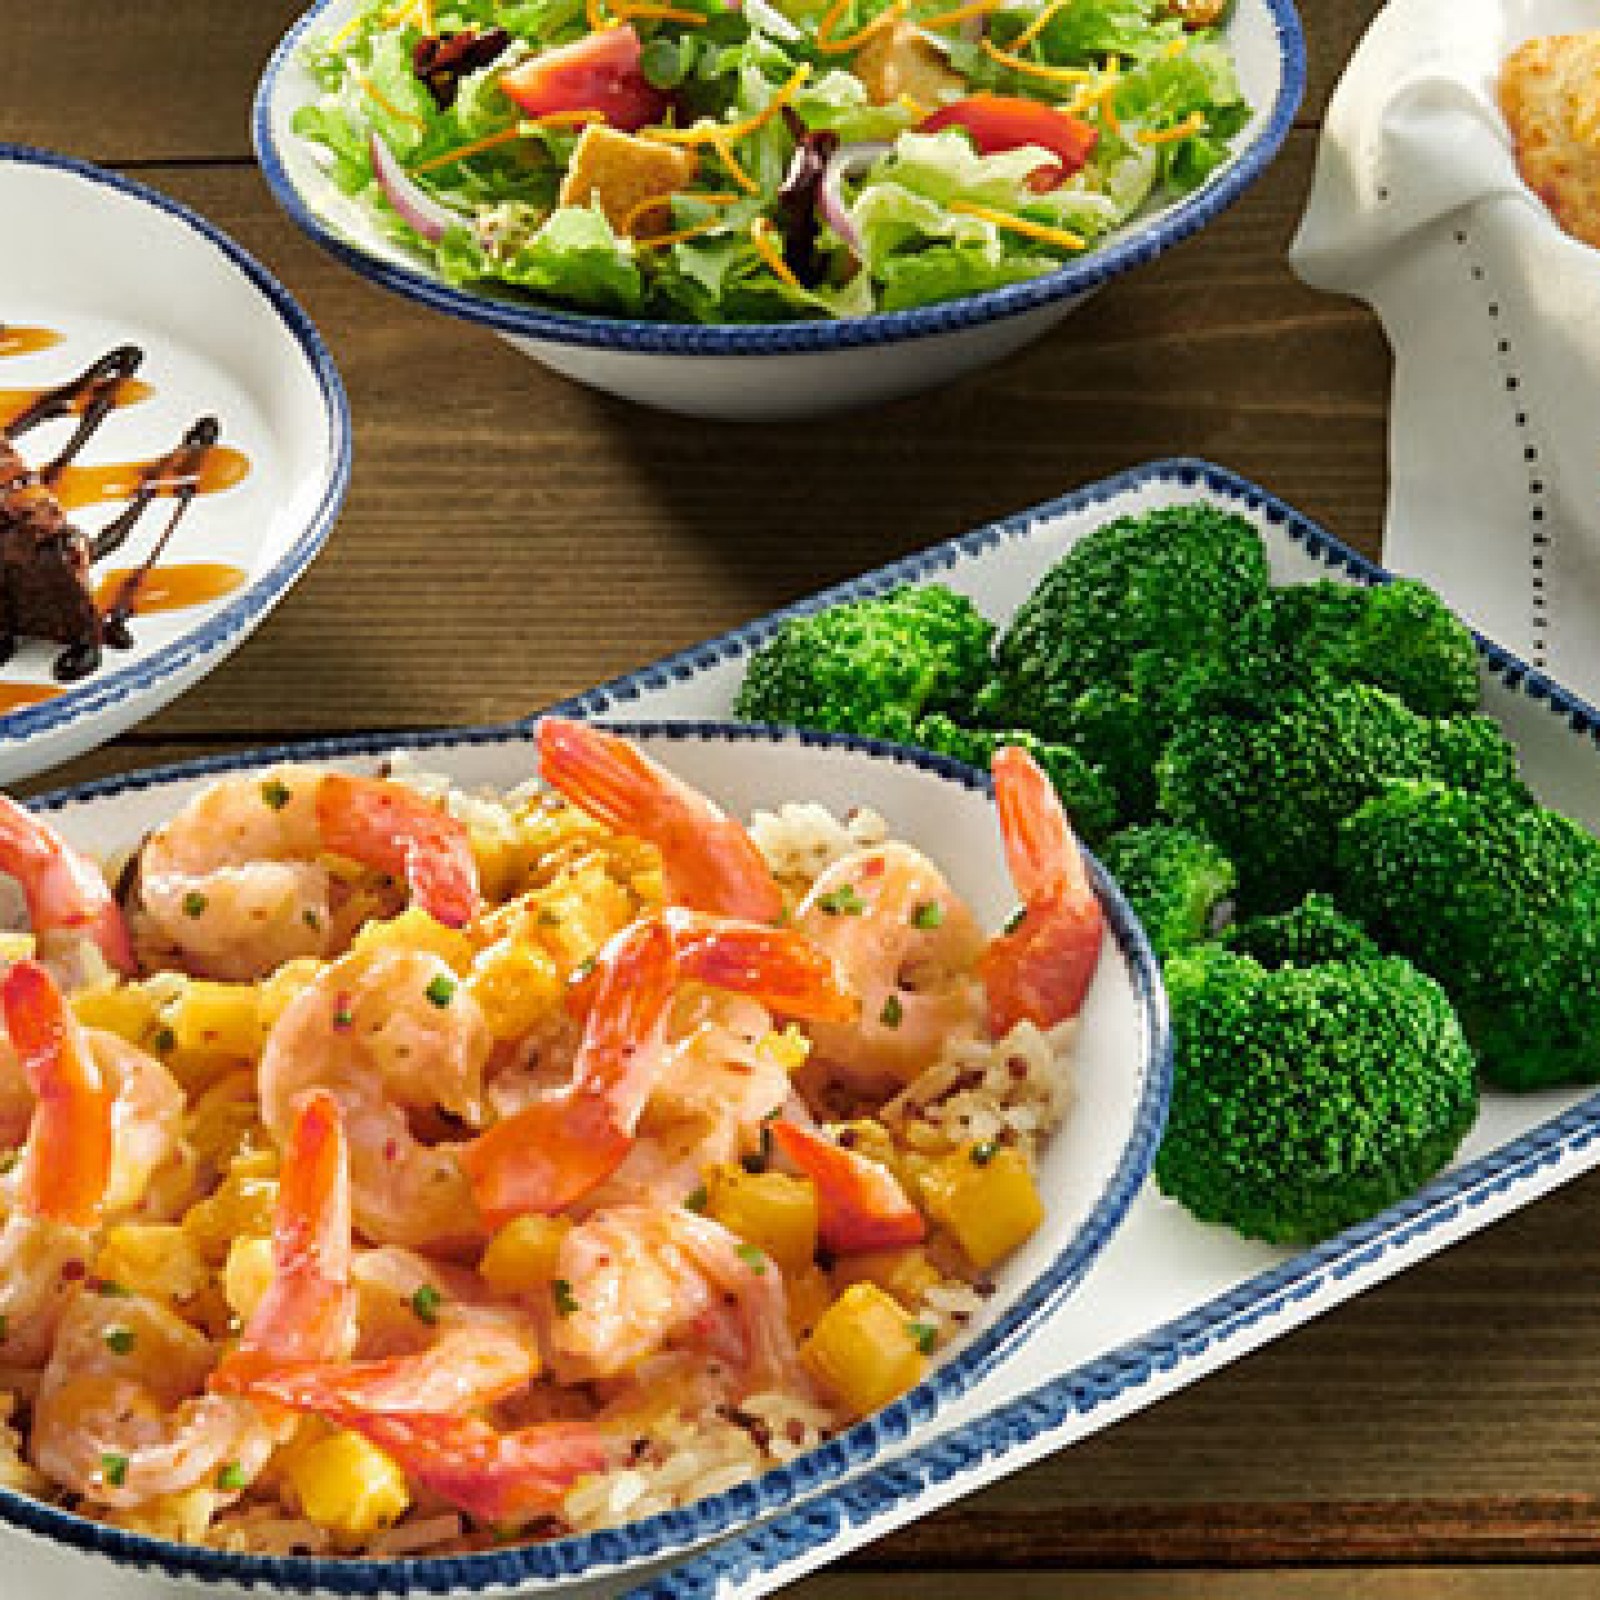 Red Lobster Now Has A 3 Course Shrimp Feast Meal Deal With New Menu Items For 14 99 [ 1600 x 1600 Pixel ]